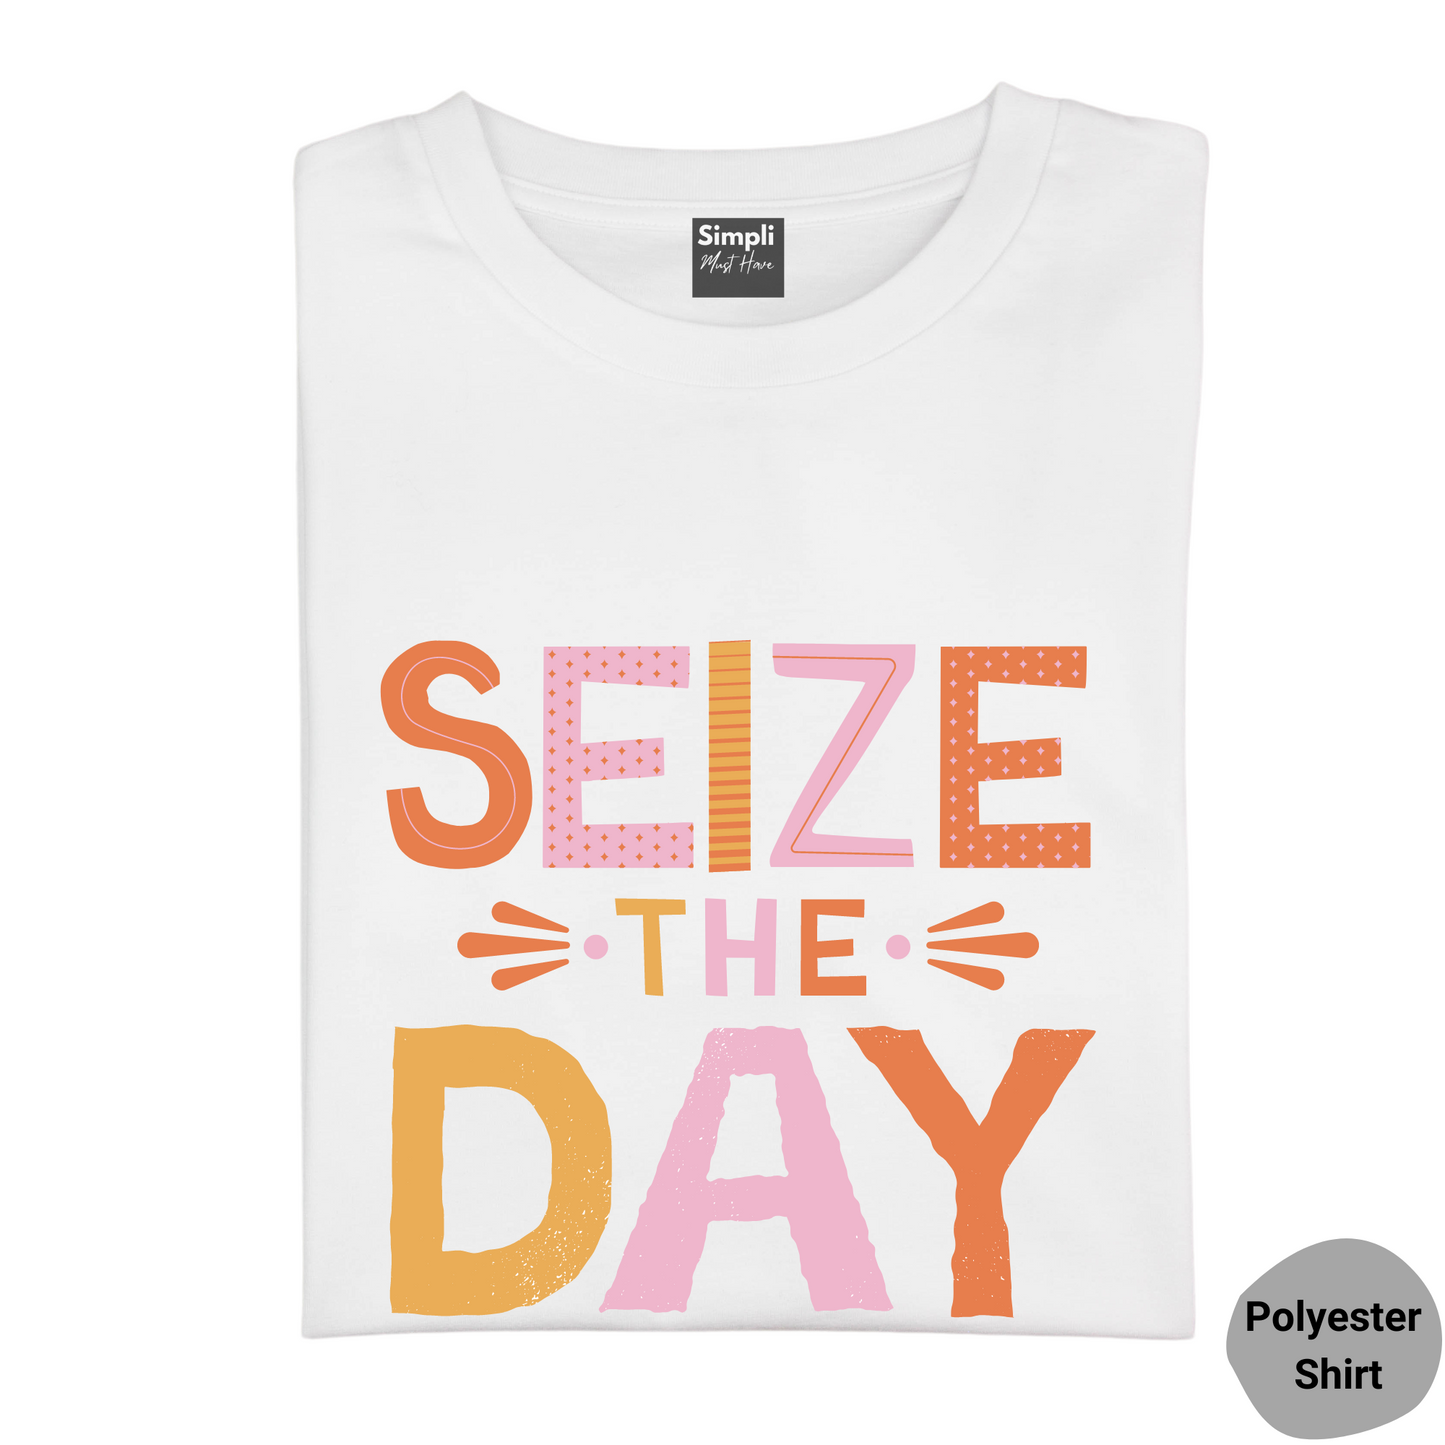 Seize the Day Tshirt